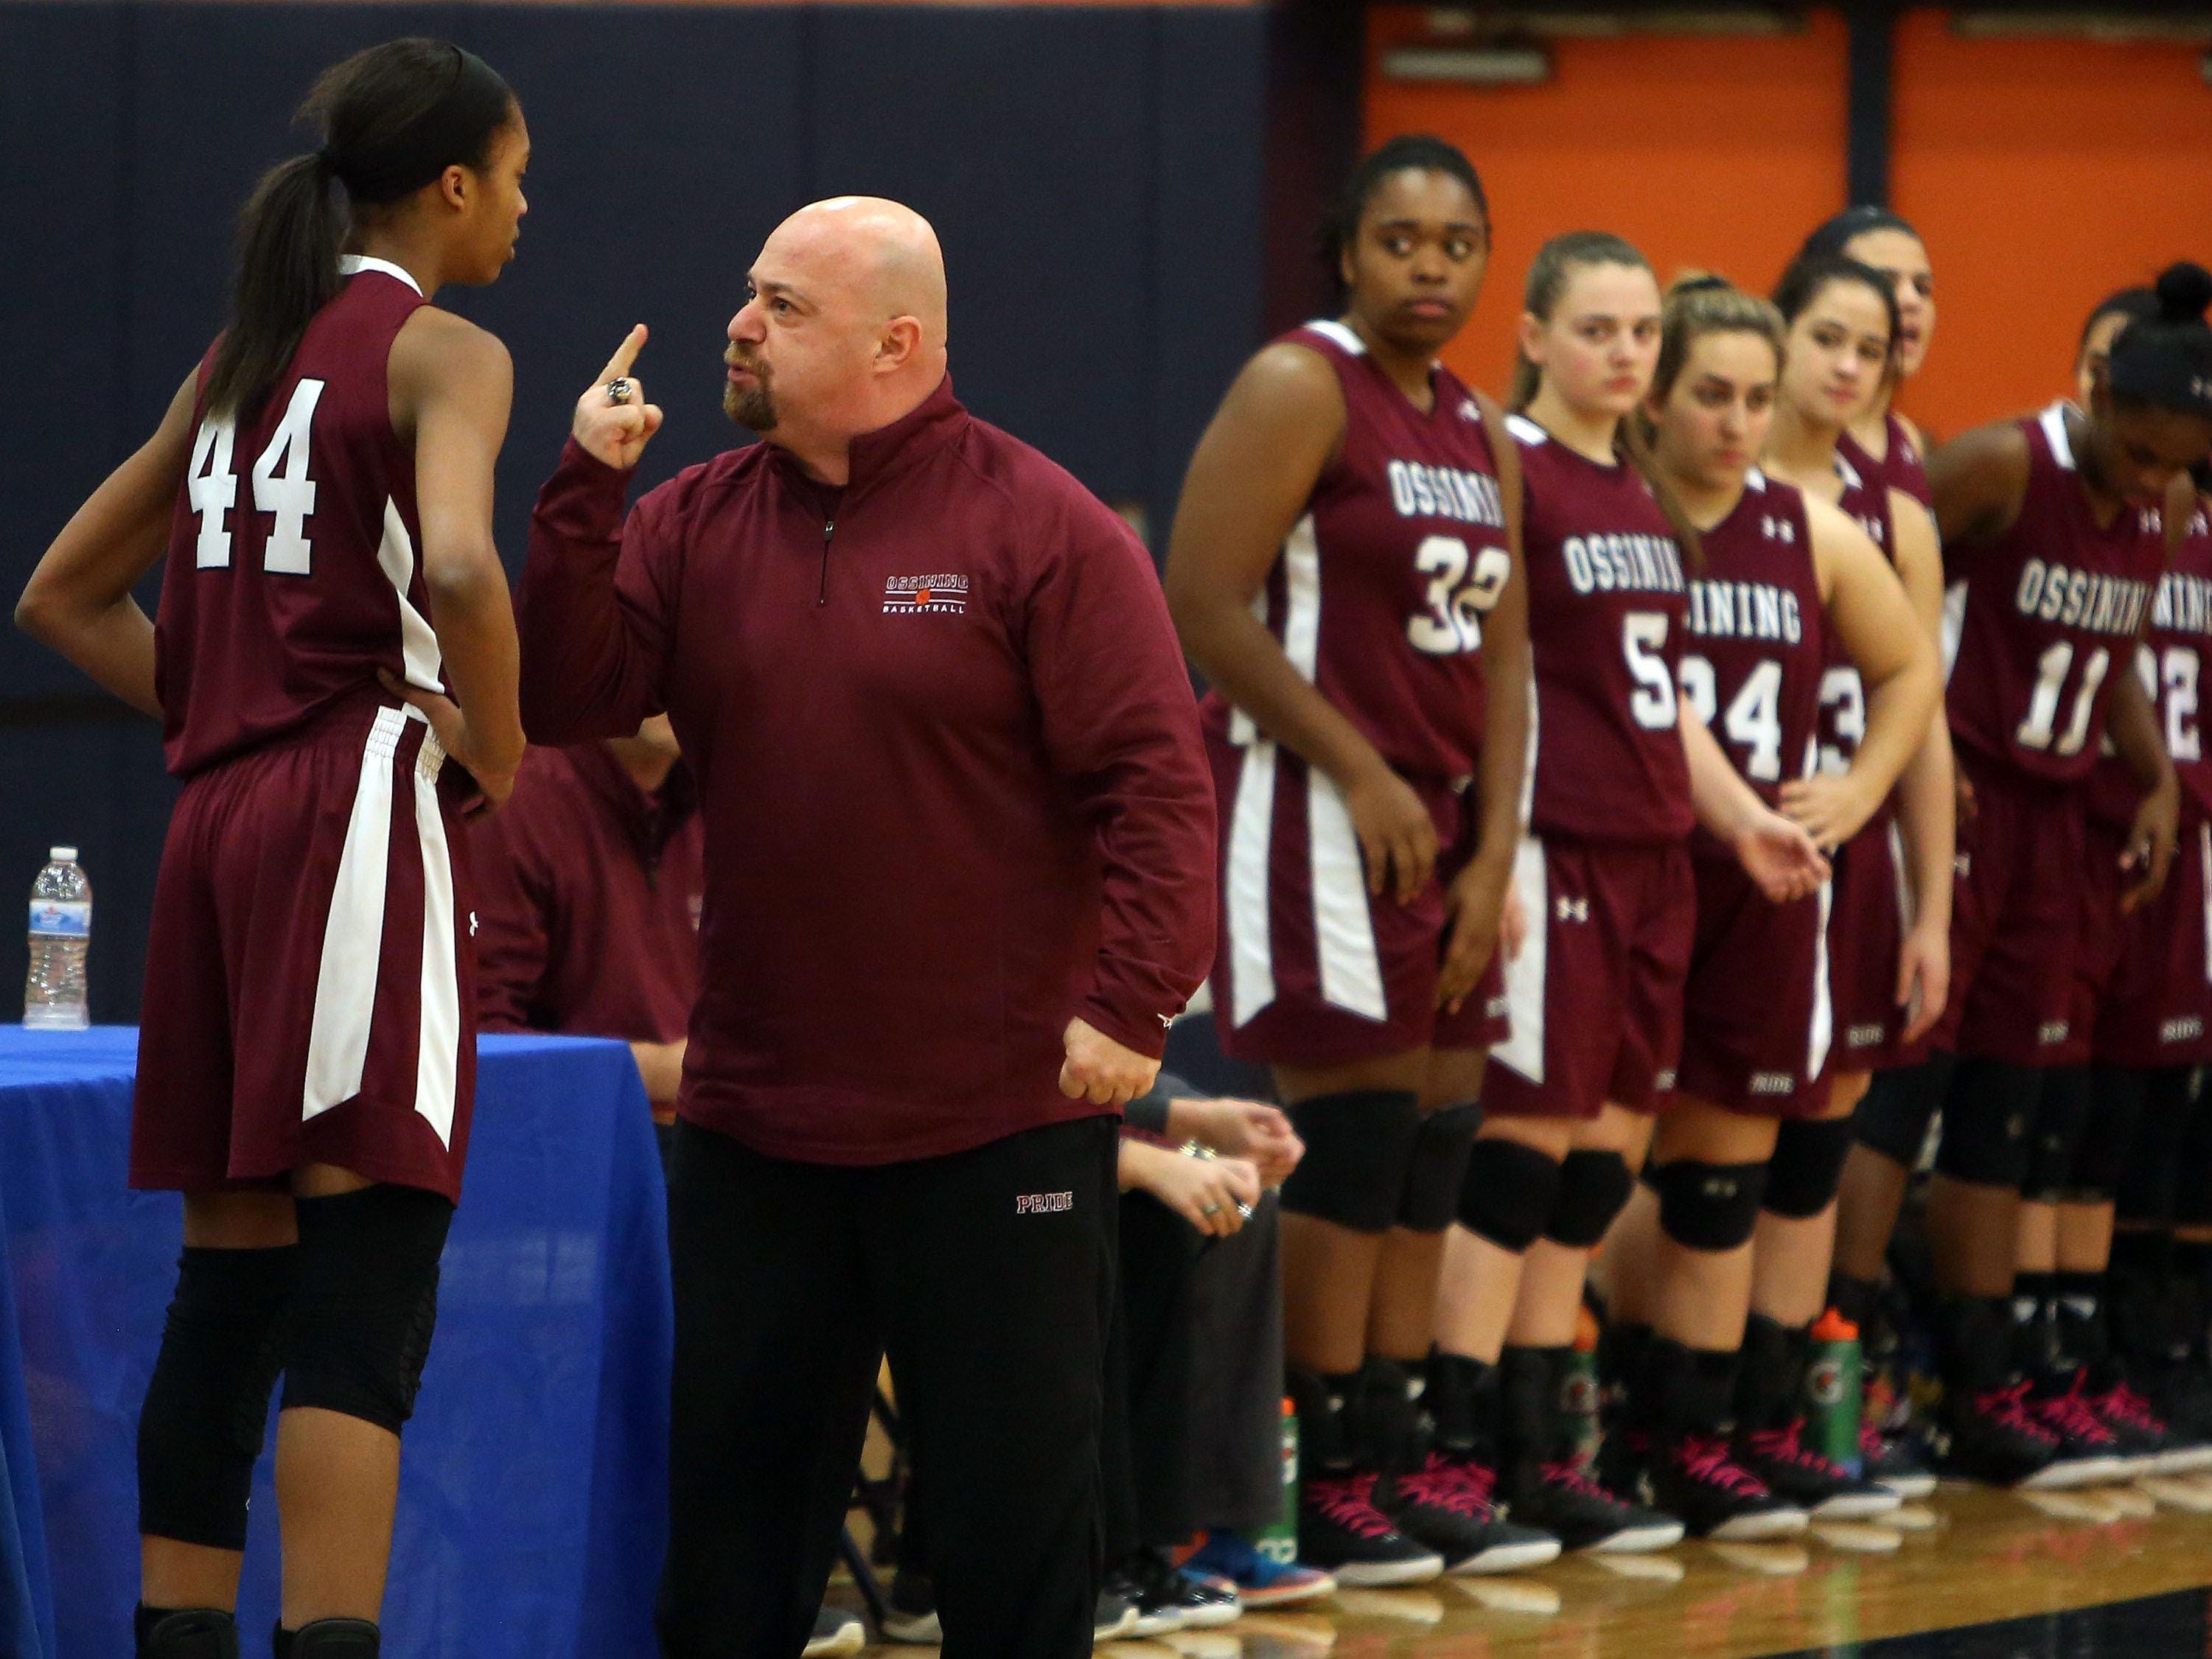 Ossining head coach Dan Ricci expresses displeasure with freshman forward Aubrey Griffin (44) in the girls Class AA regional final at Orange Community College in Middletown March 4, 2016.